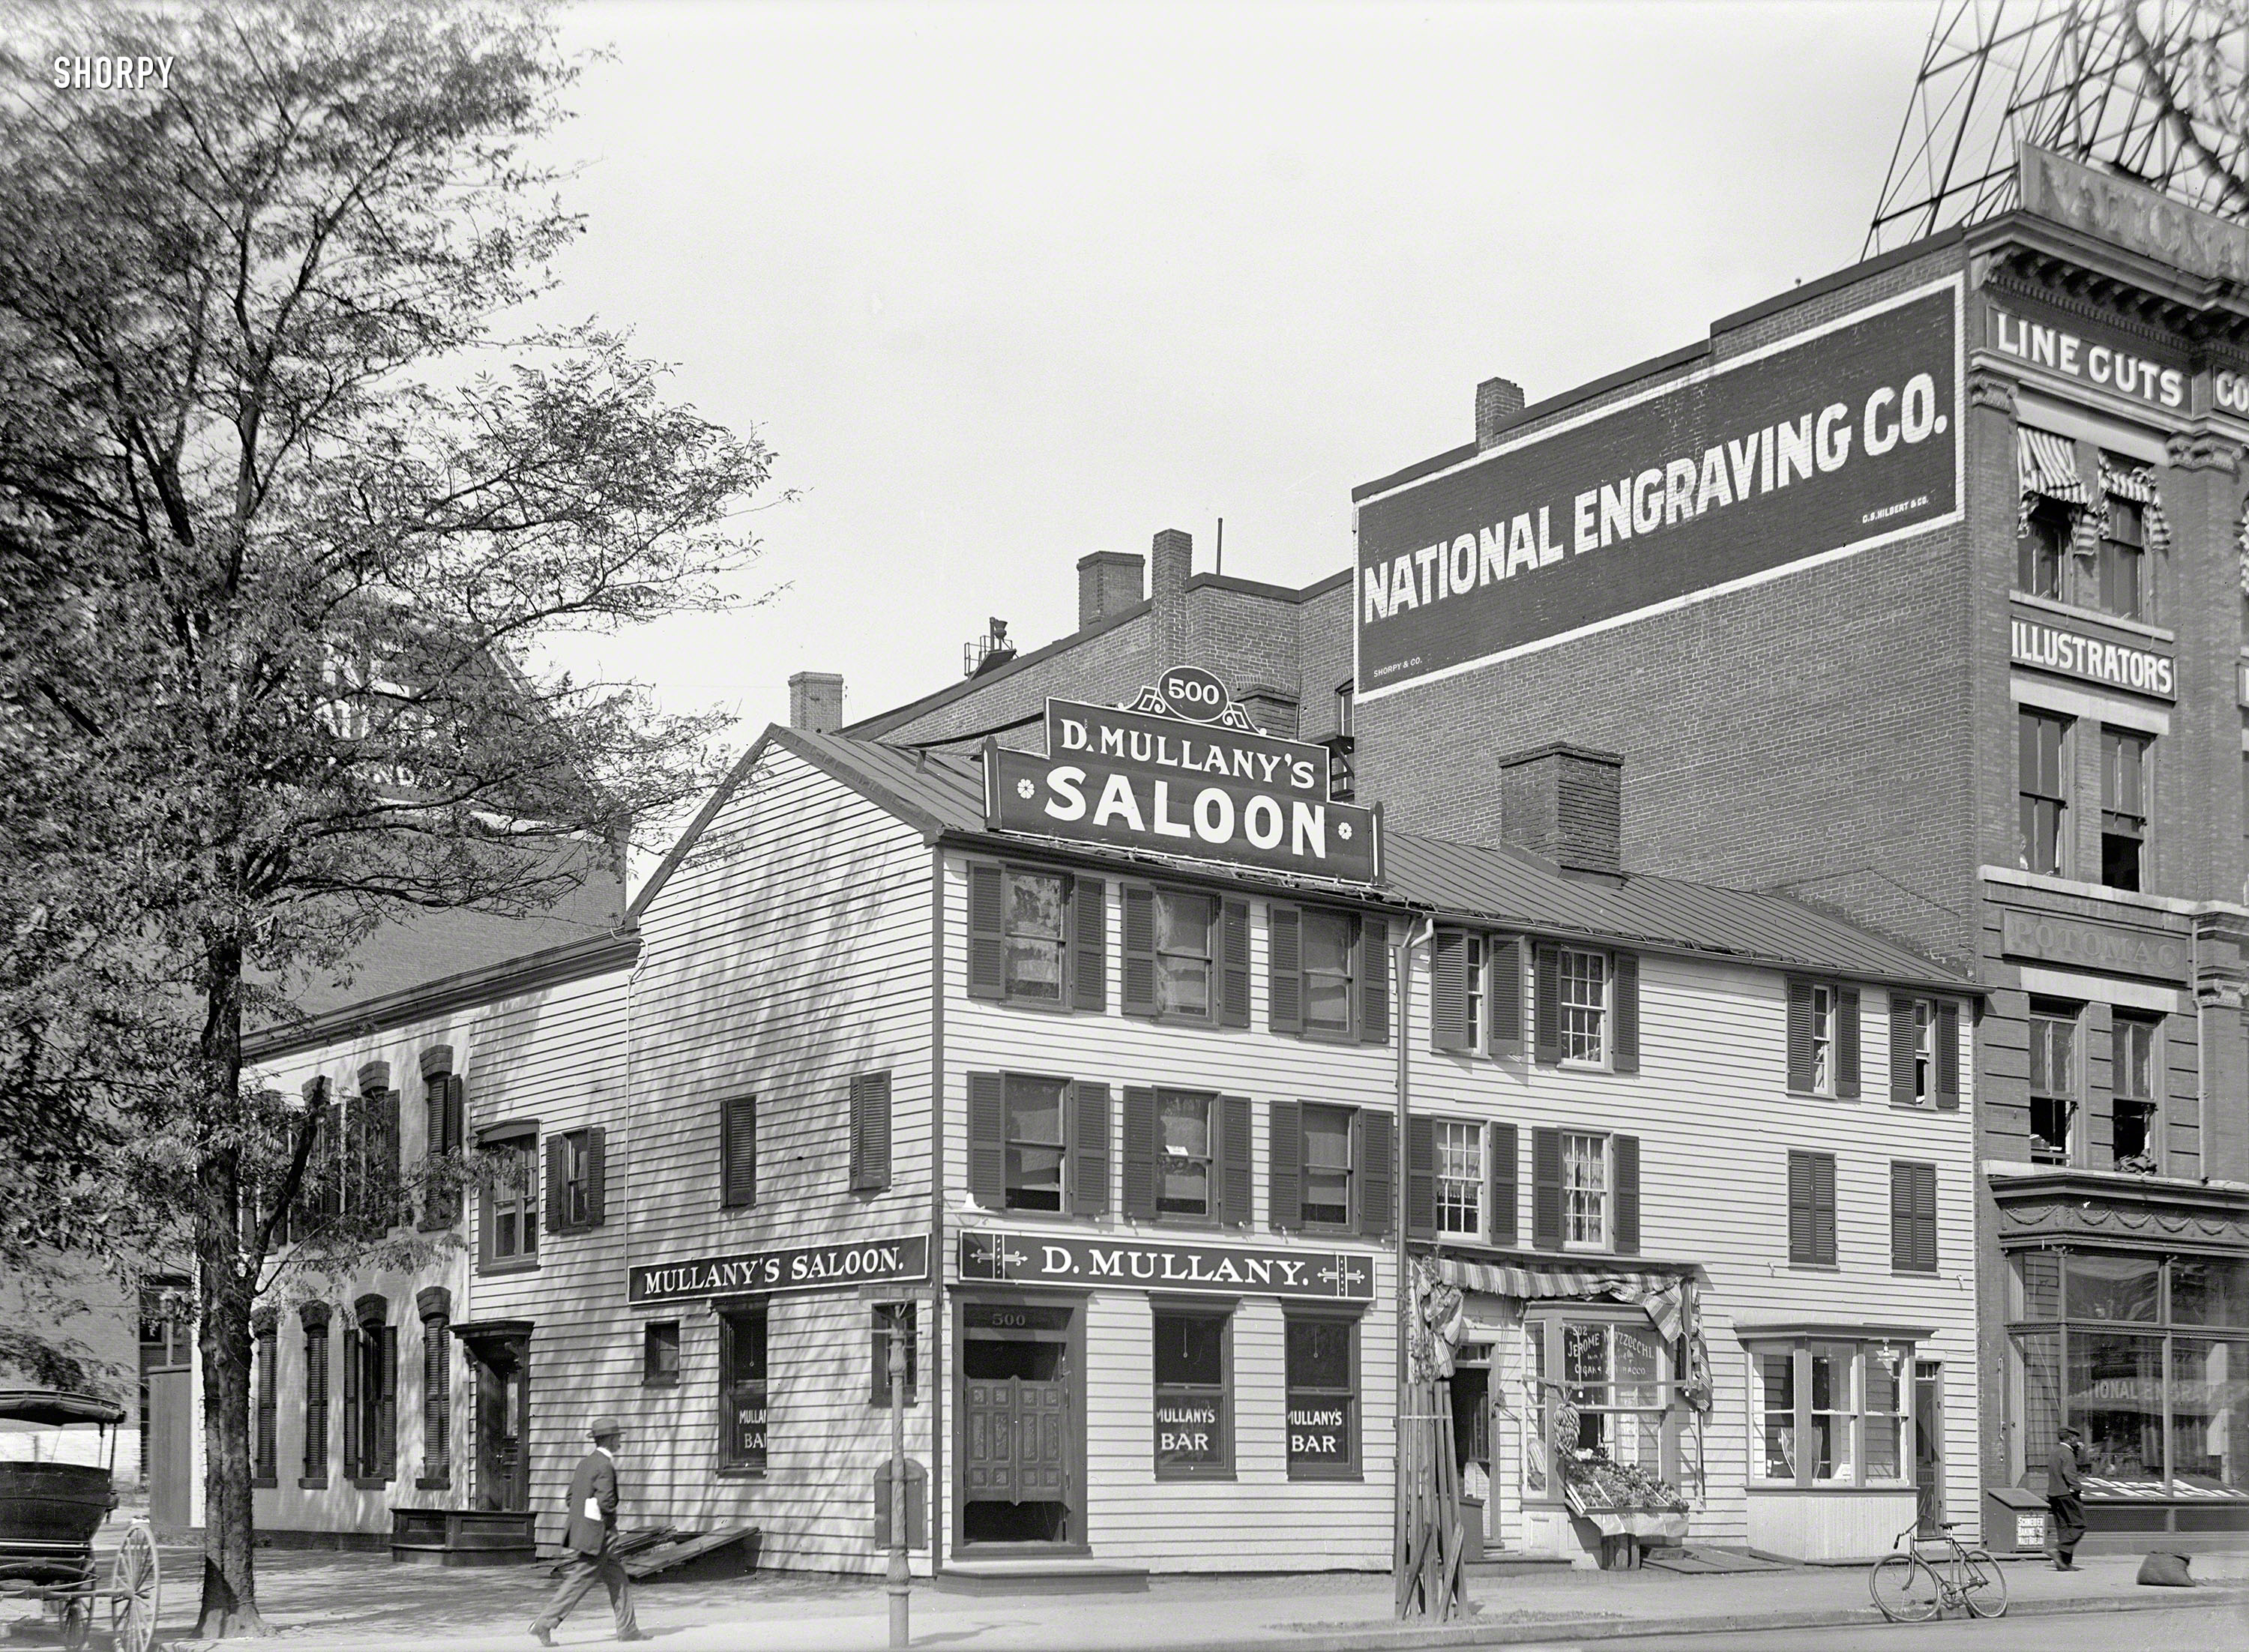 Washington, D.C., 1913. "Mullany's Saloon, 14th & E Sts. N.W." More about this venerable watering hole here. Harris & Ewing glass negative. View full size.